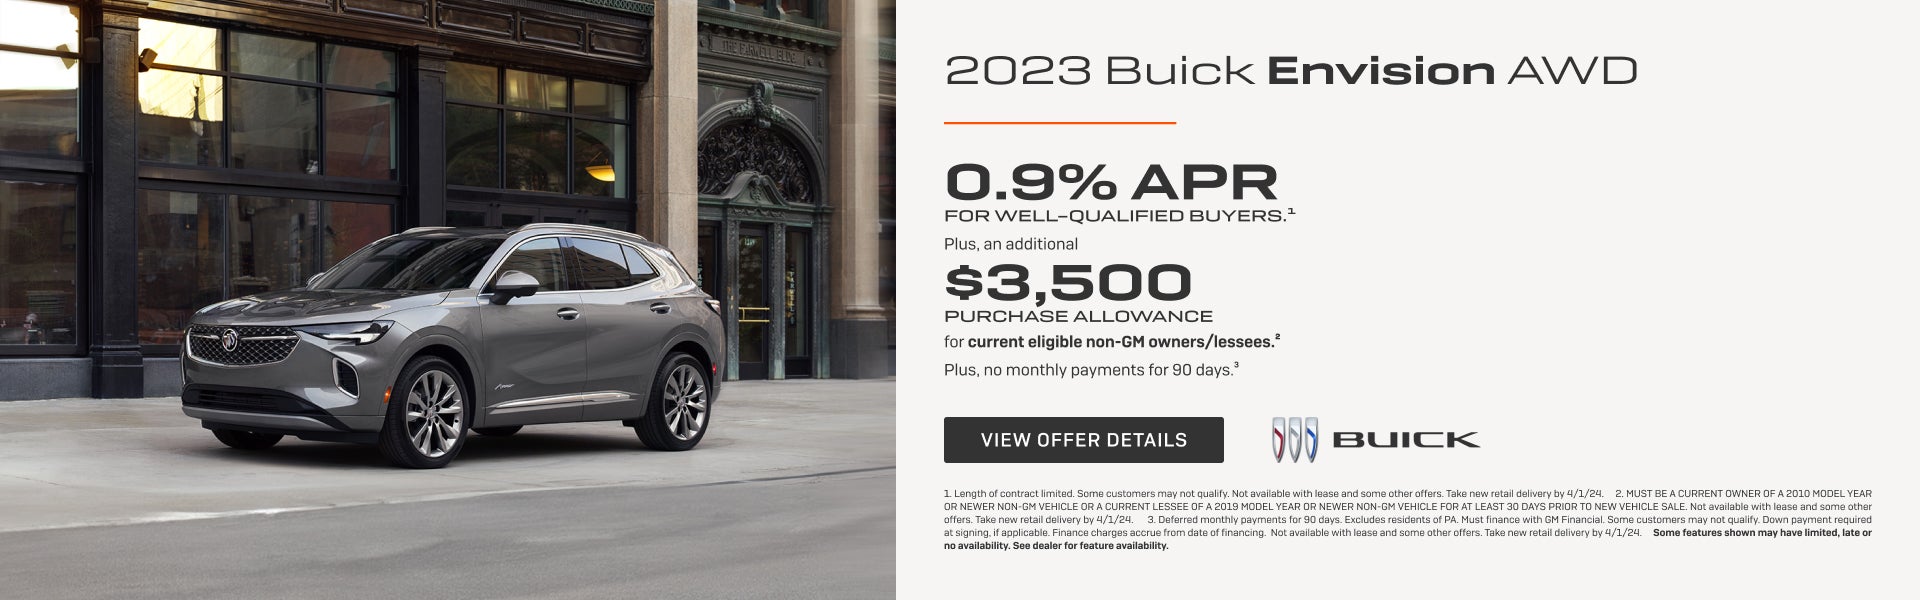 0.9% APR 
FOR WELL-QUALIFIED BUYERS.1

Plus, an additional $3,500 PURCHASE ALLOWANCE for current ...